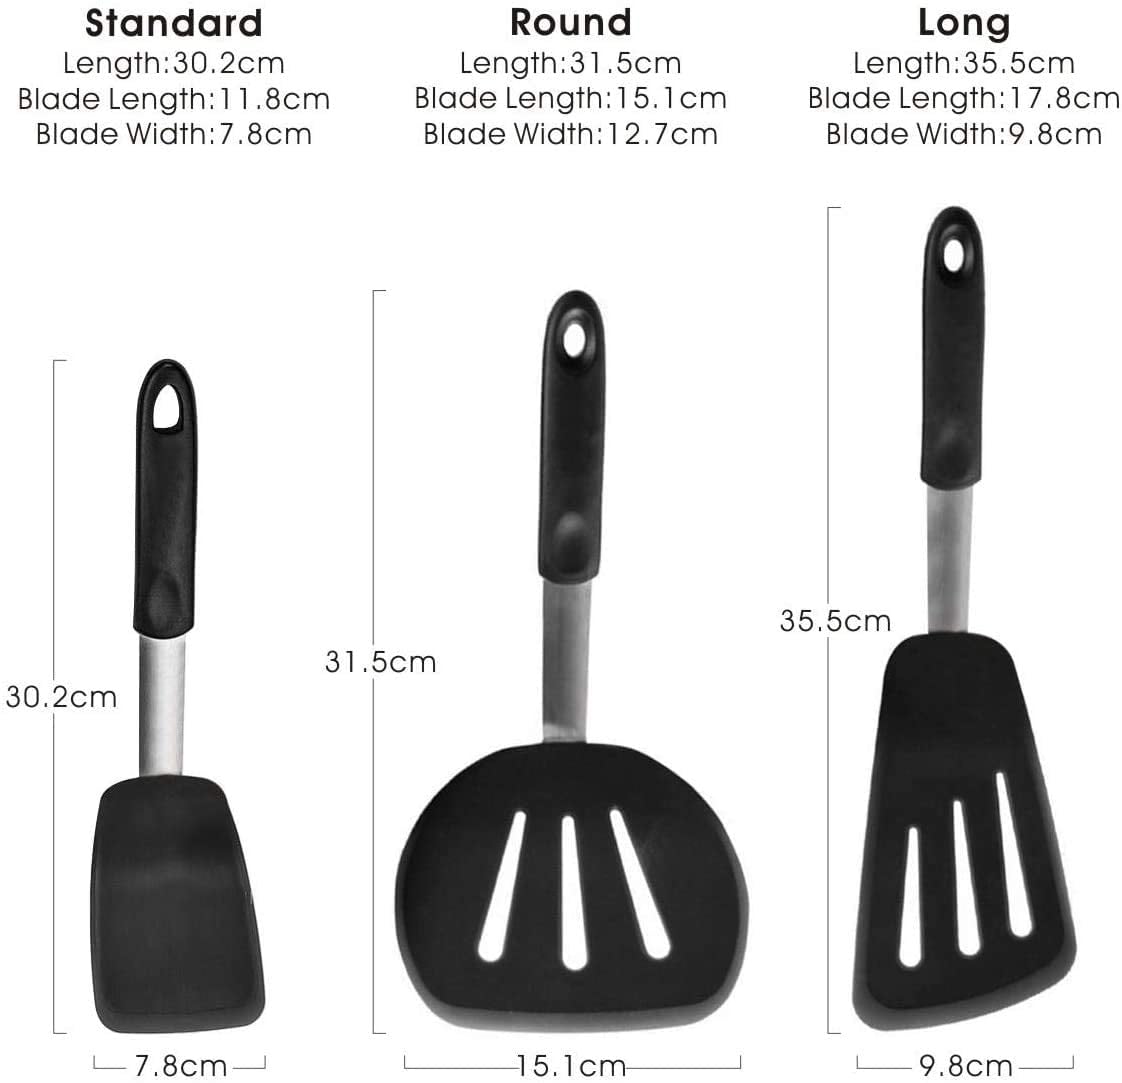 Non-Stick 600F Heat Resistant Utensils for Cooking Kitchen Spatulas Turner Stainless Steel & Premium Silicone Kaffi Turner Spatula Set Flipping and Pressing 3Pack 